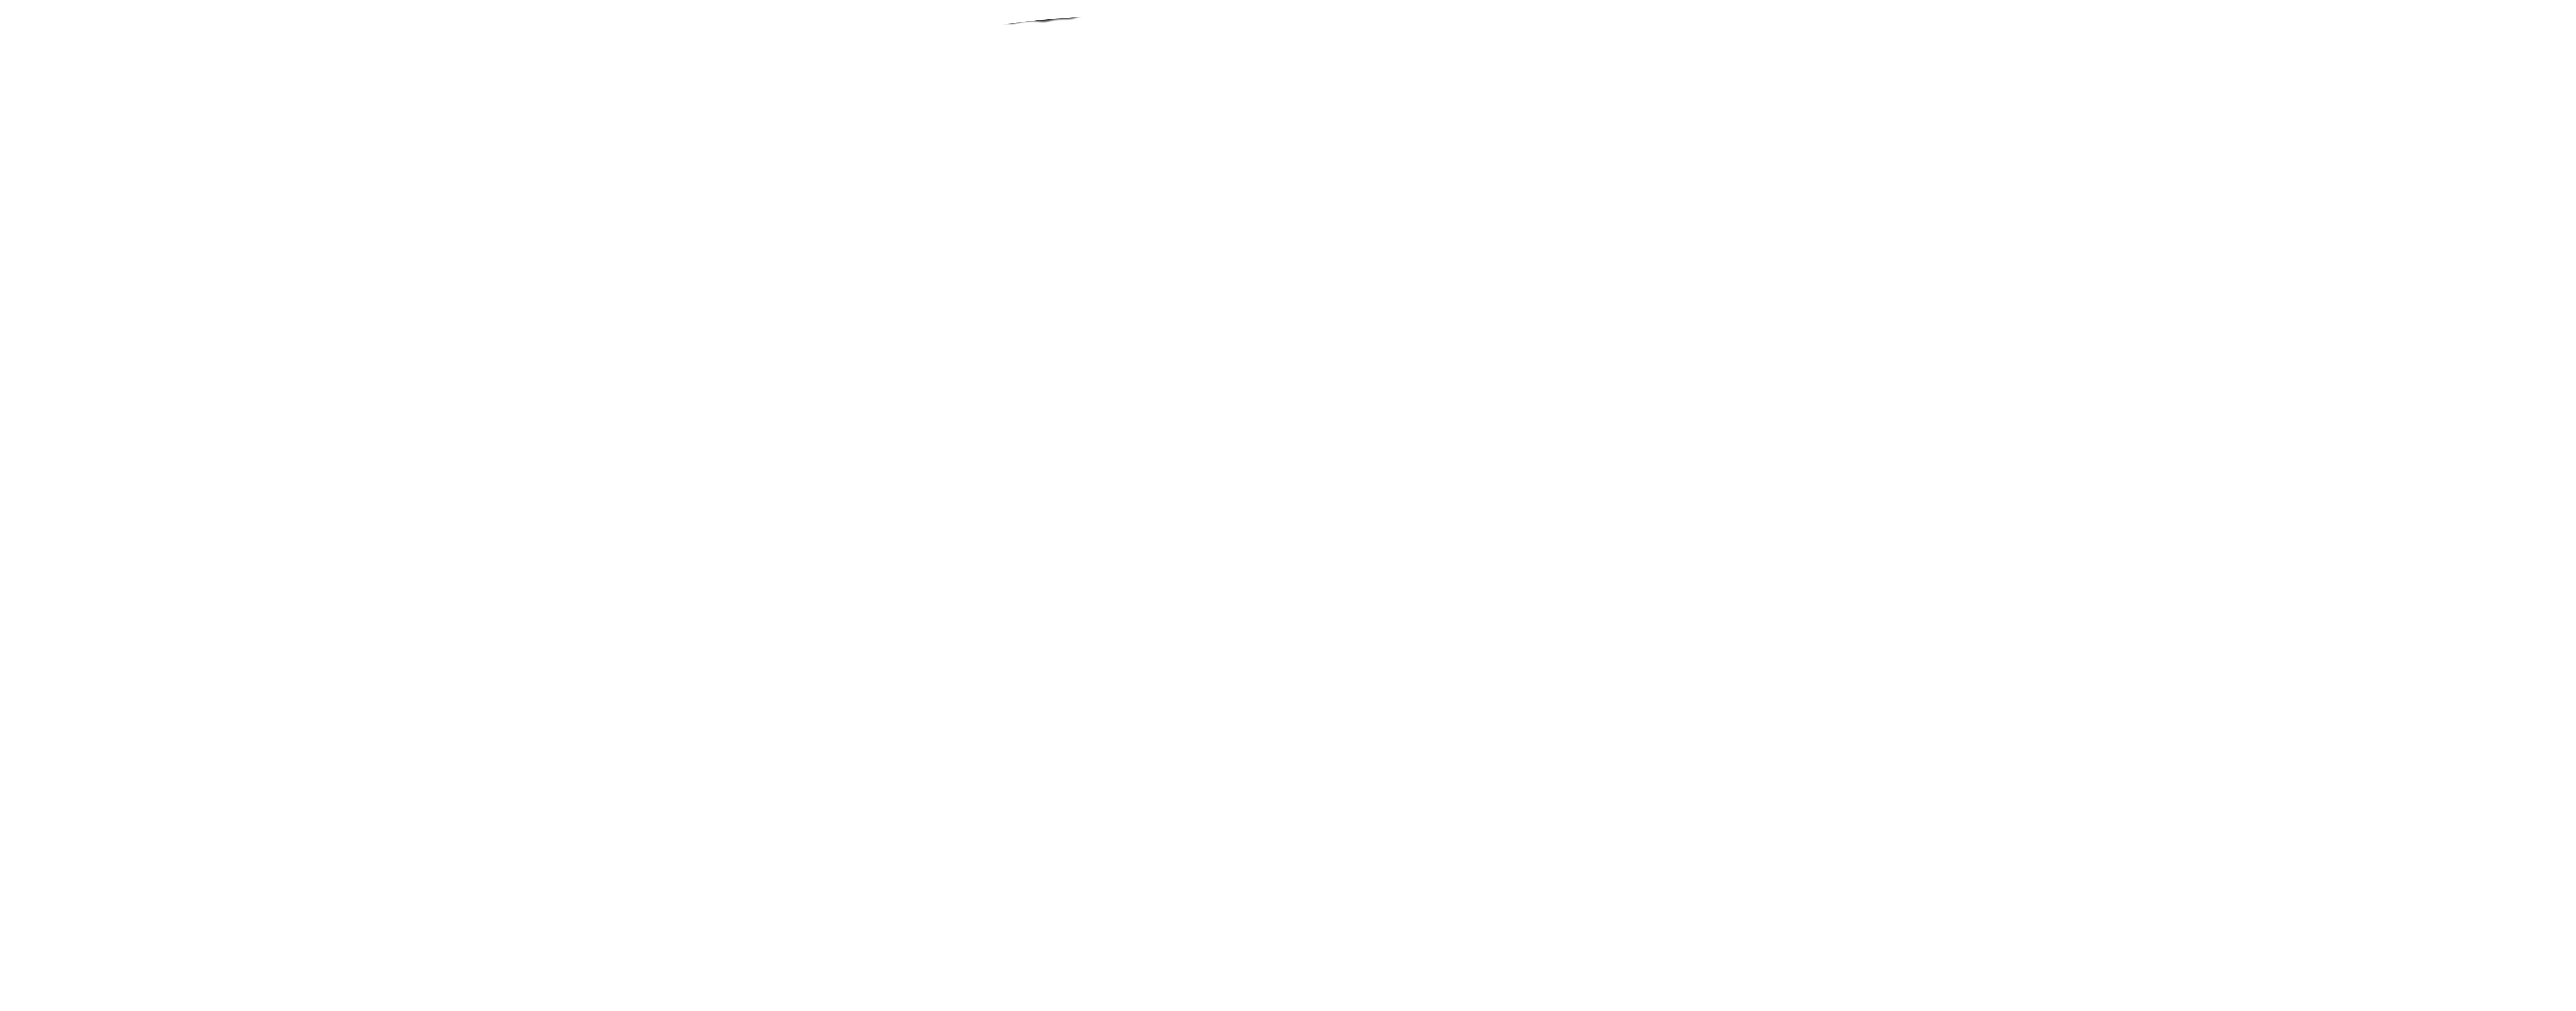 German-Collection